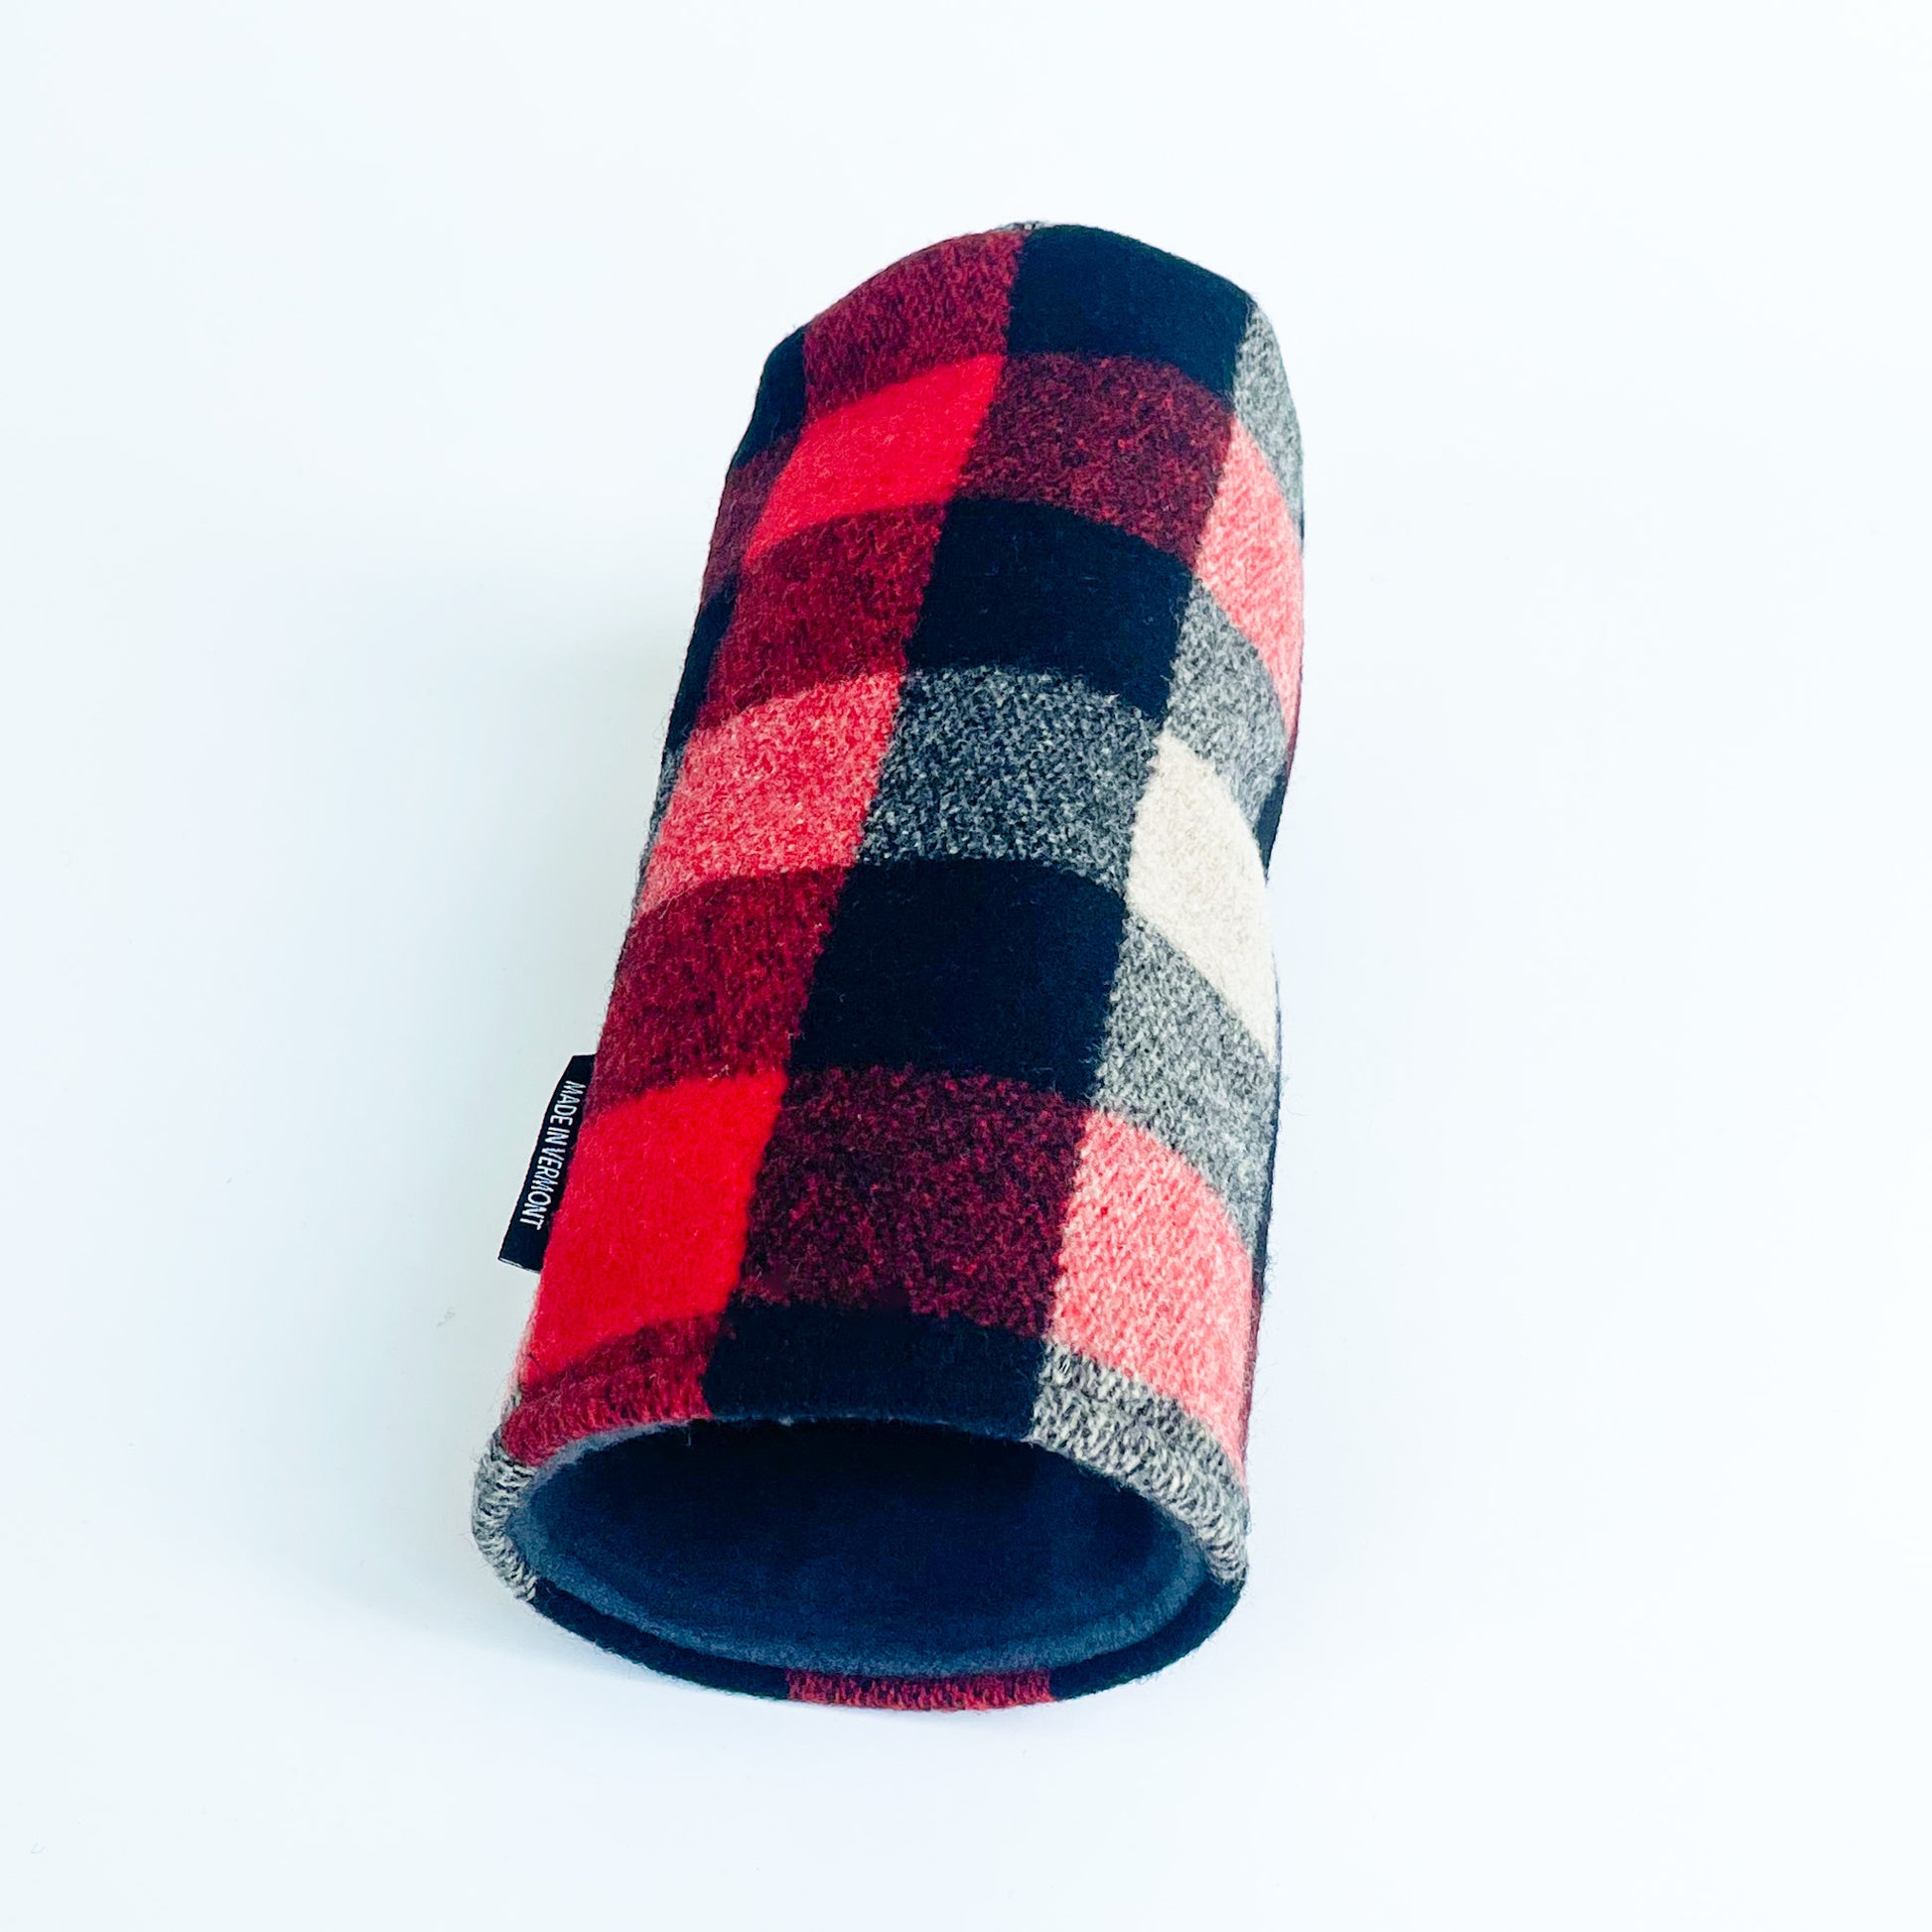 Red, black, and ivory buffalo check wool driver headcover shown with interior fleece lining